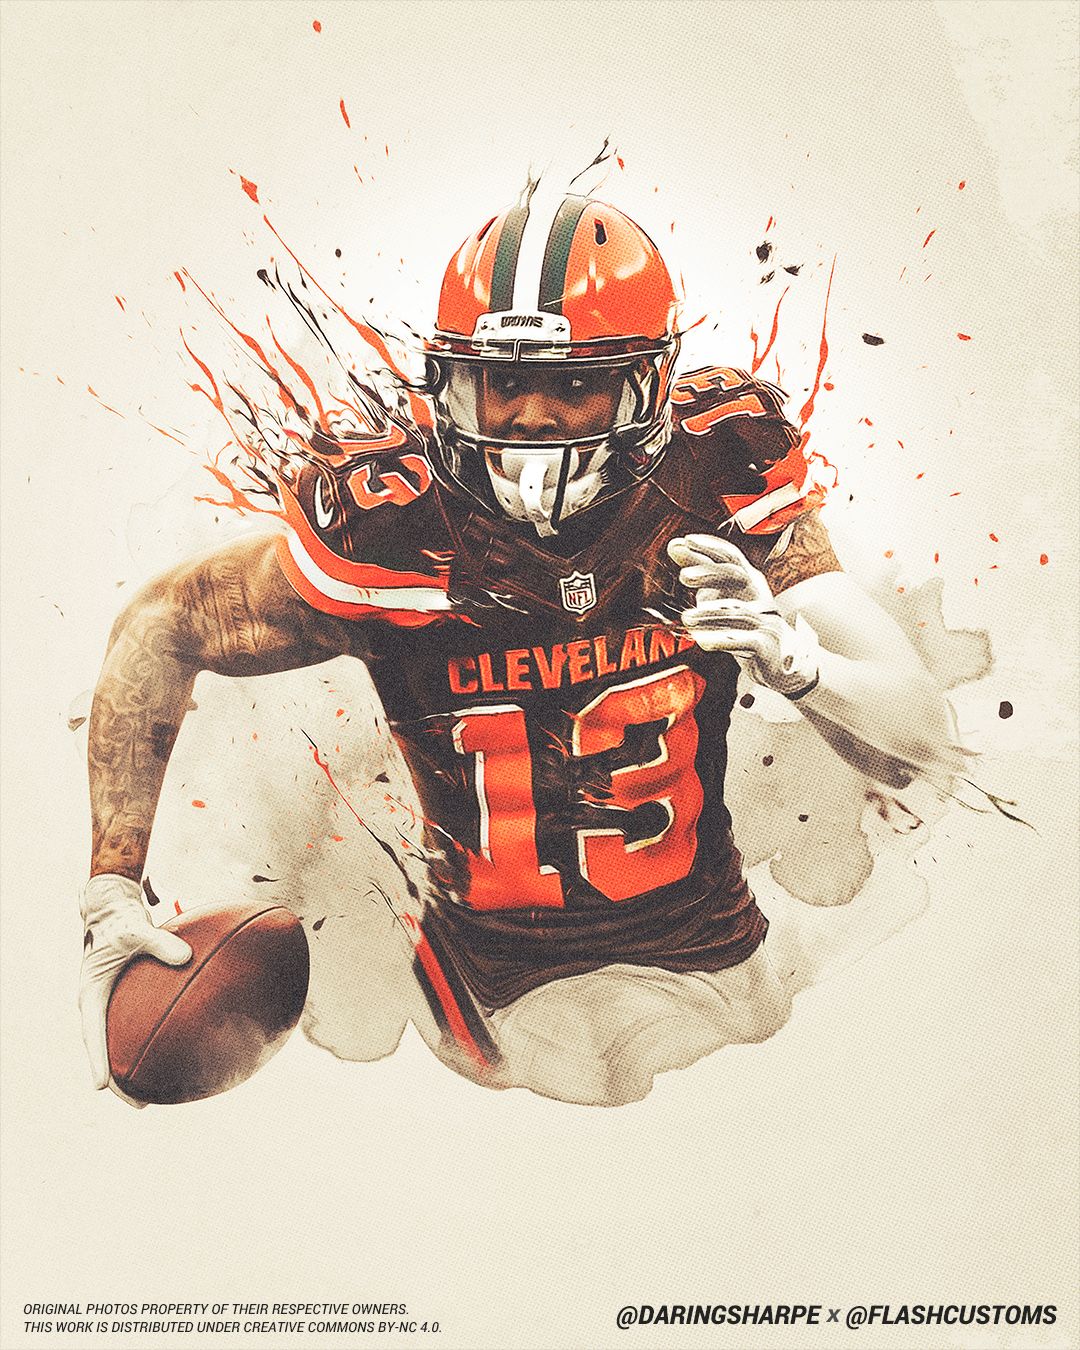 Download Cleveland Browns wallpapers for mobile phone free Cleveland  Browns HD pictures